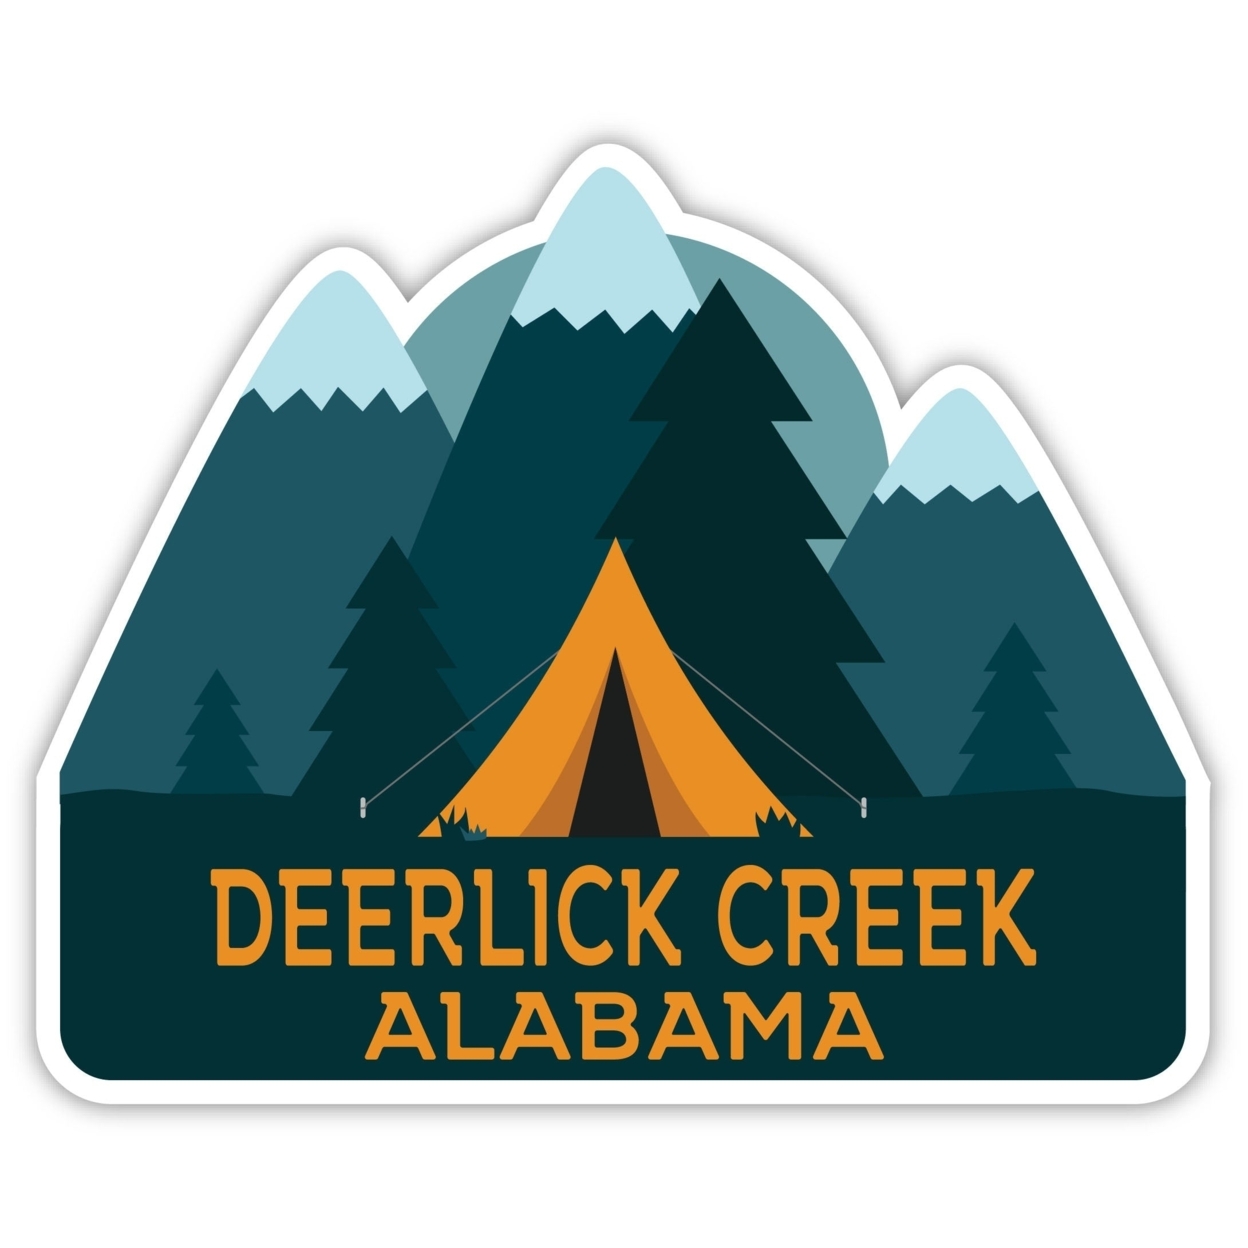 Deerlick Creek Alabama Souvenir Decorative Stickers (Choose Theme And Size) - Single Unit, 6-Inch, Great Outdoors